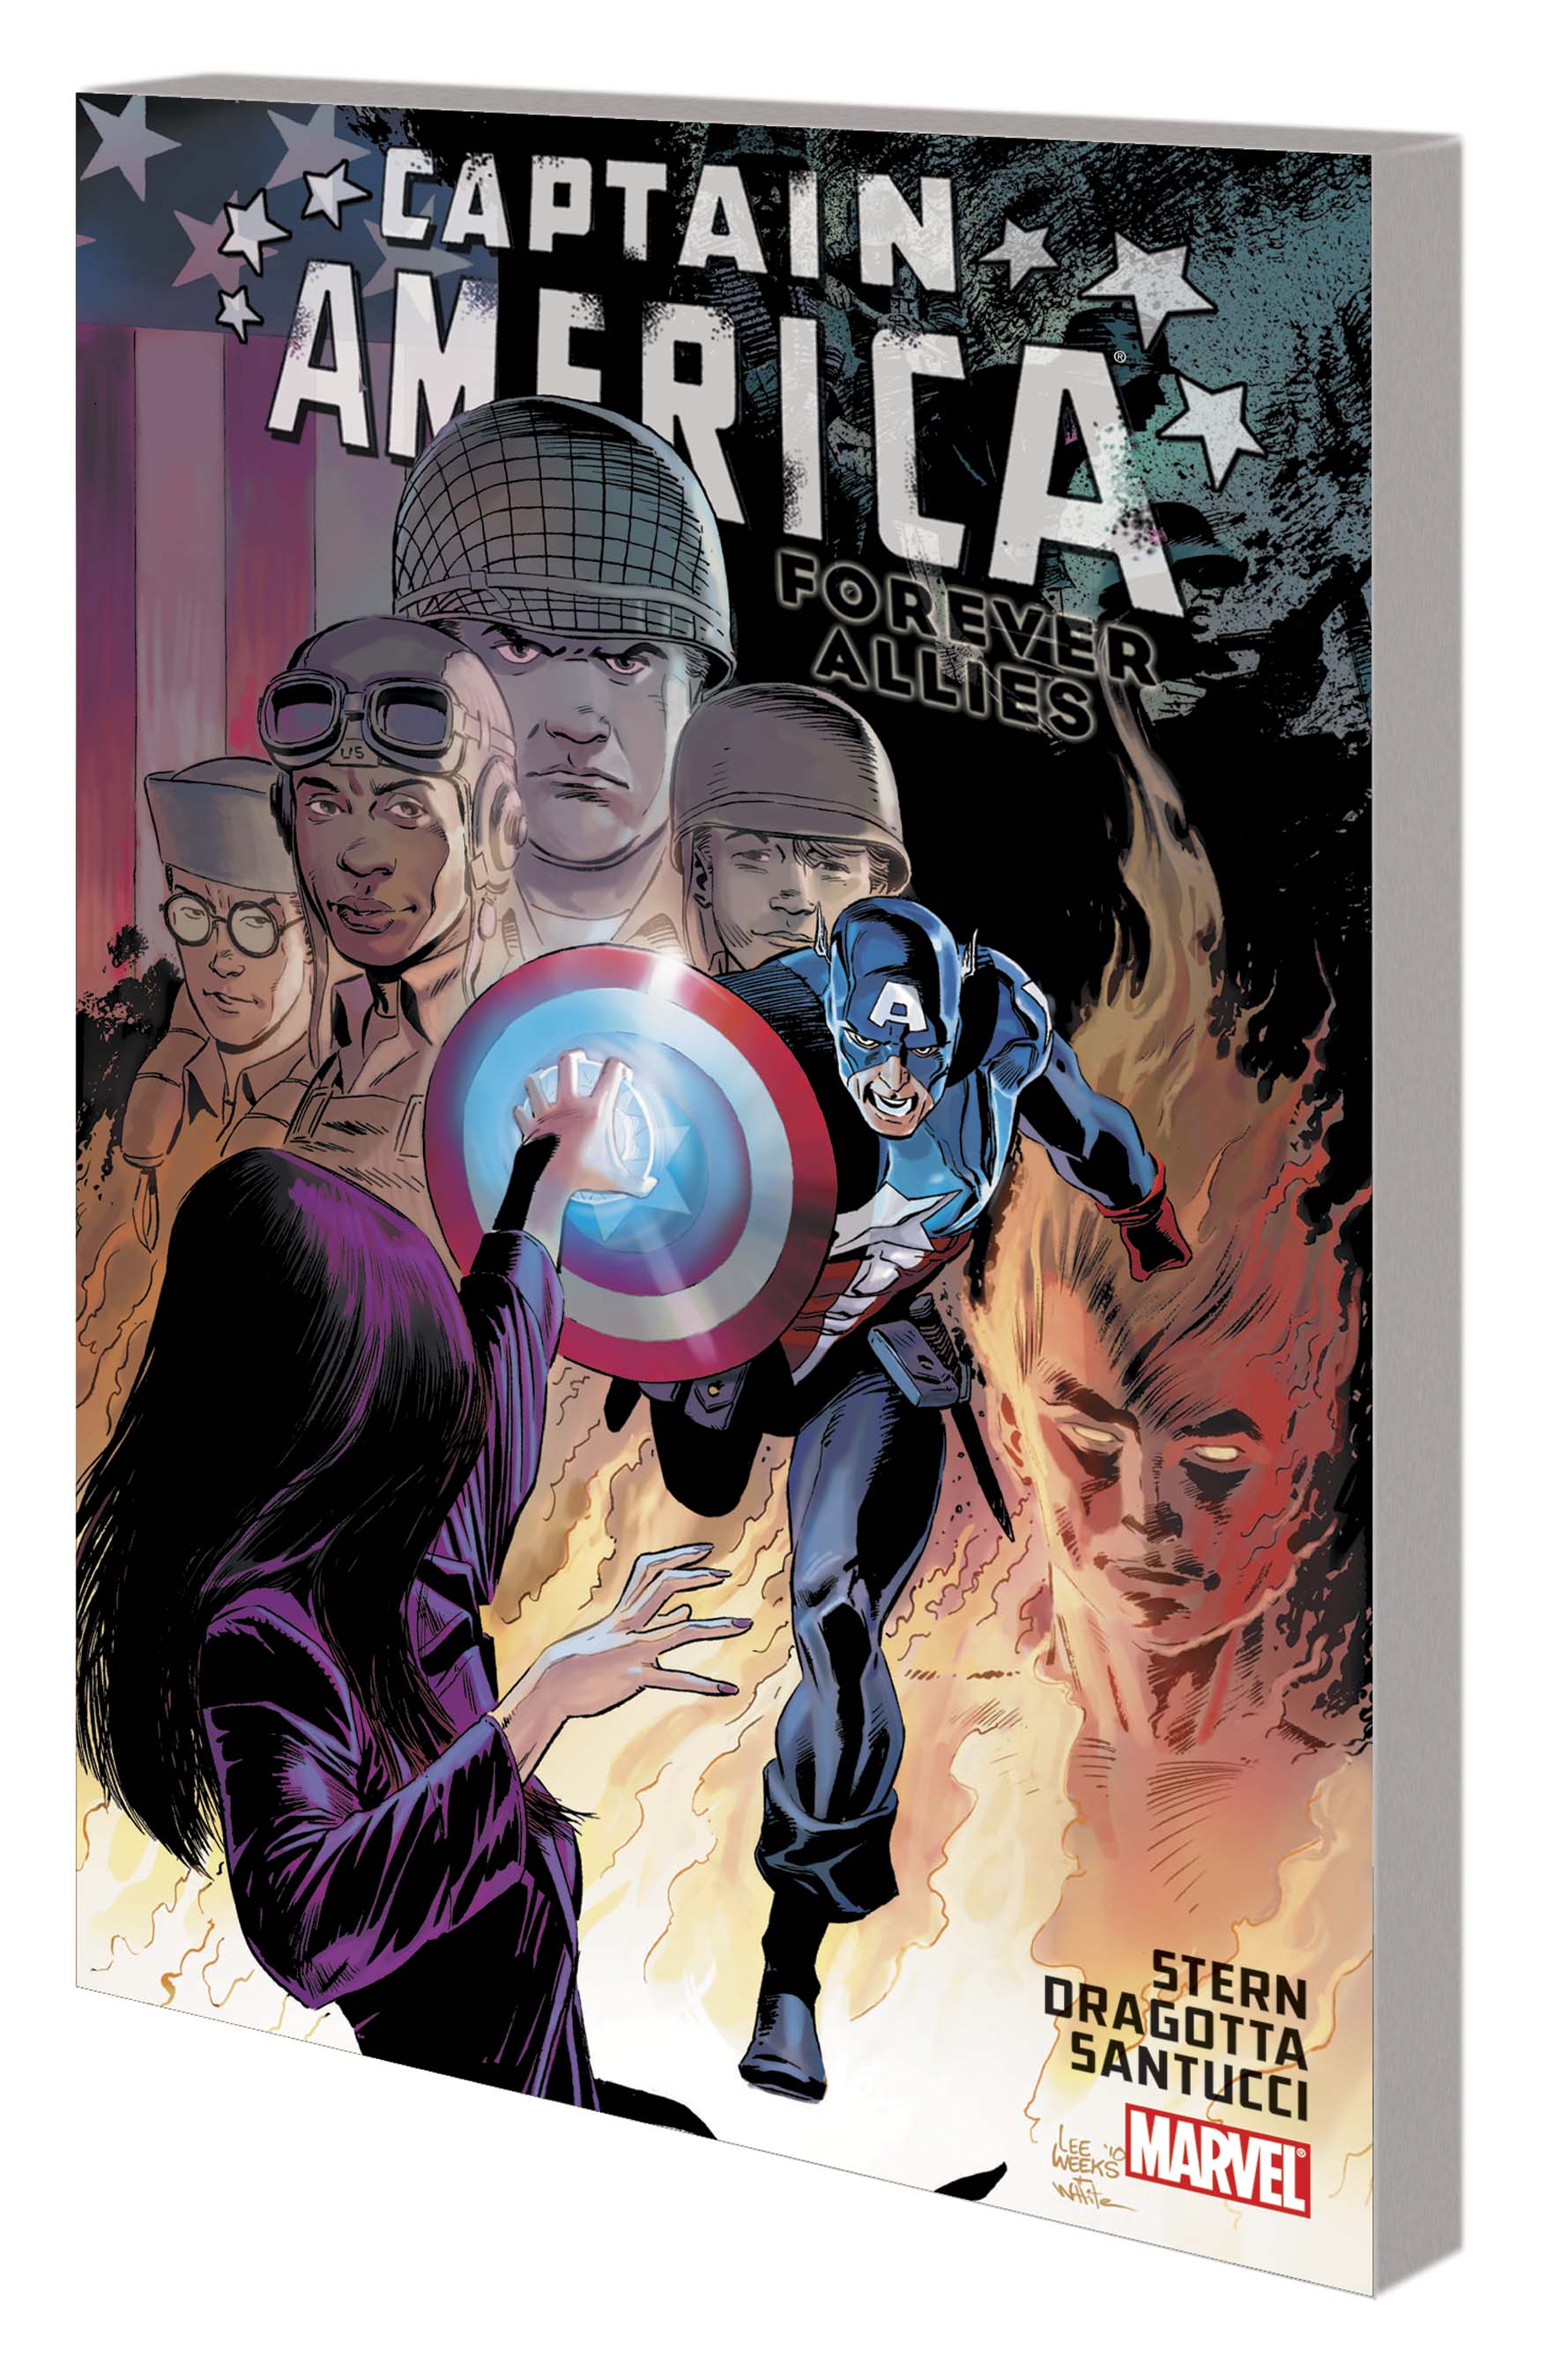 Captain America & the Young Allies (Trade Paperback)